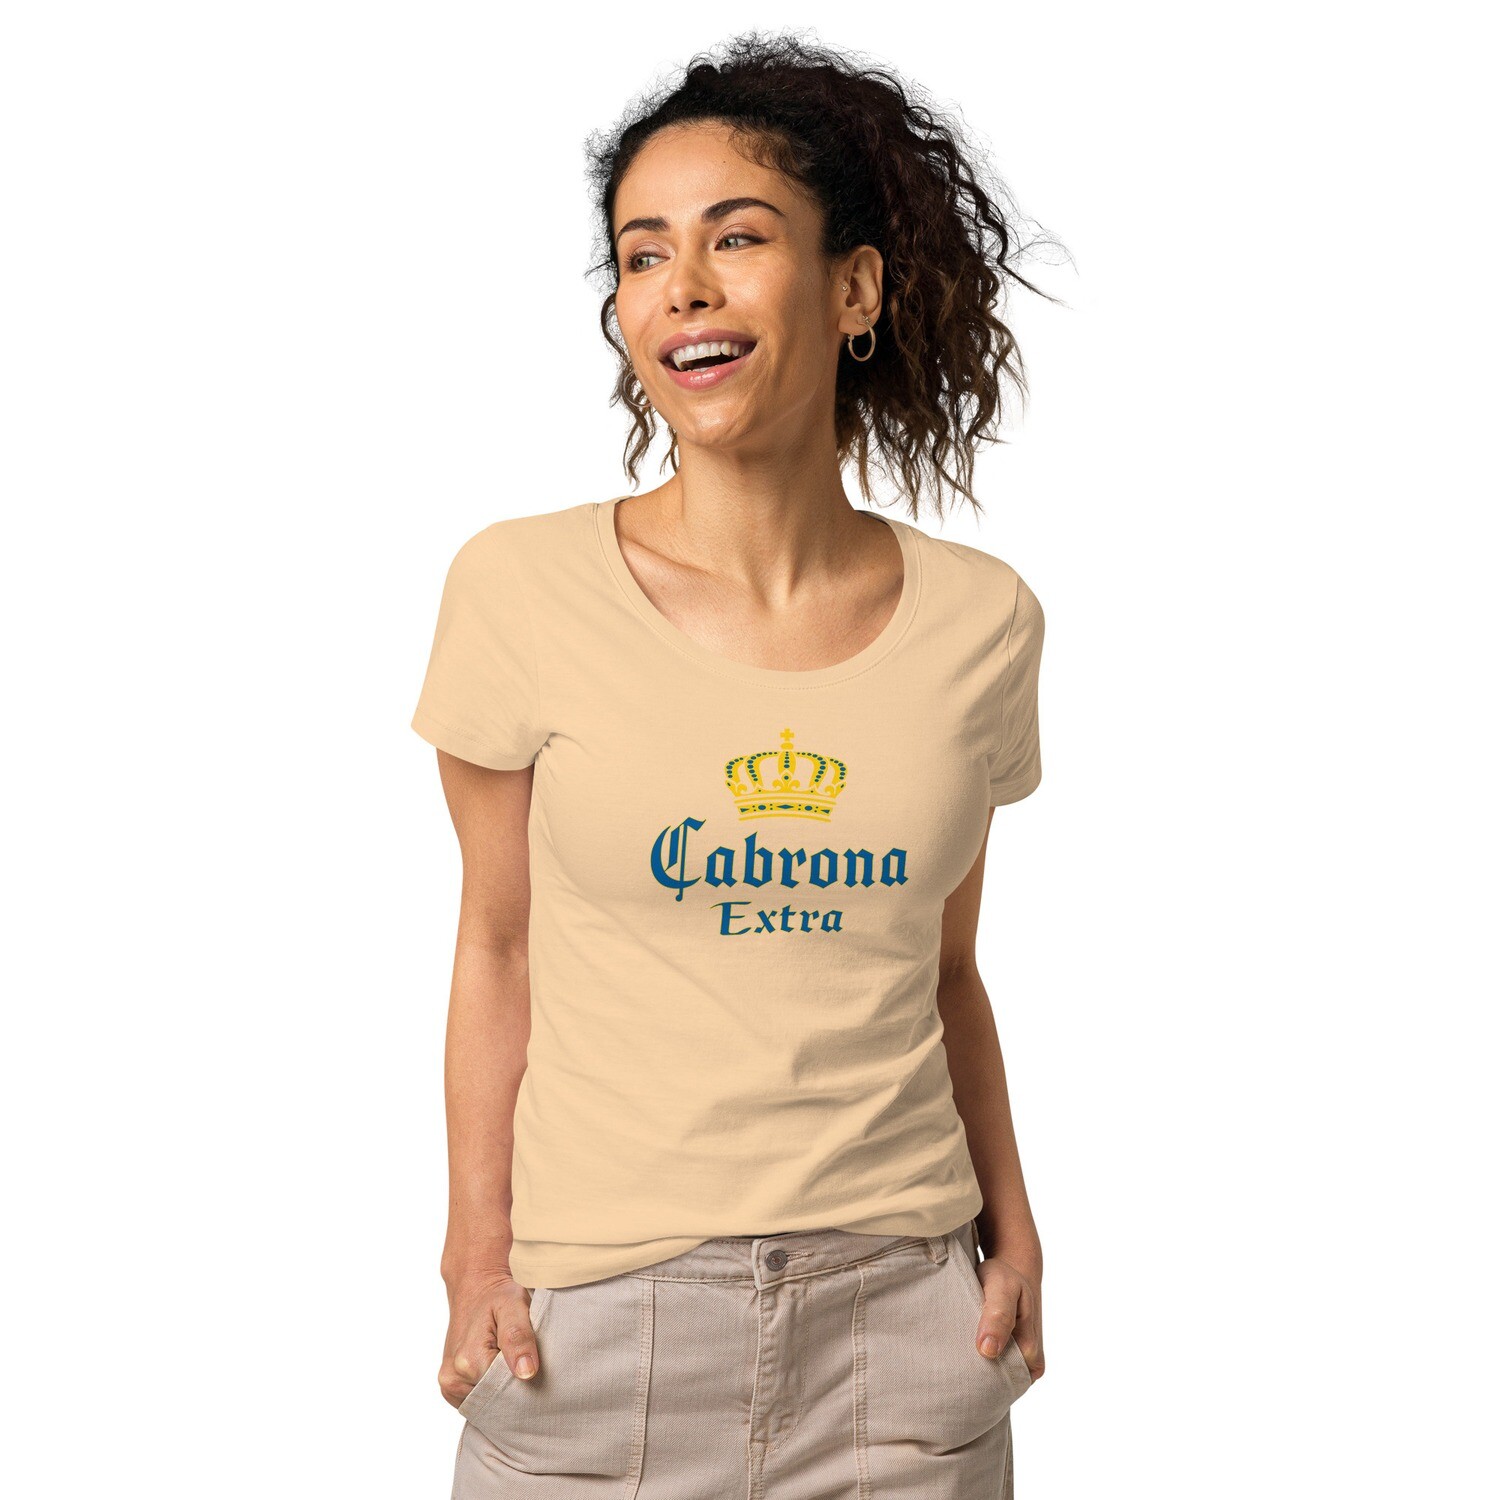 Cabrona Extra, Mexican Beer label Women’s basic organic t-shirt